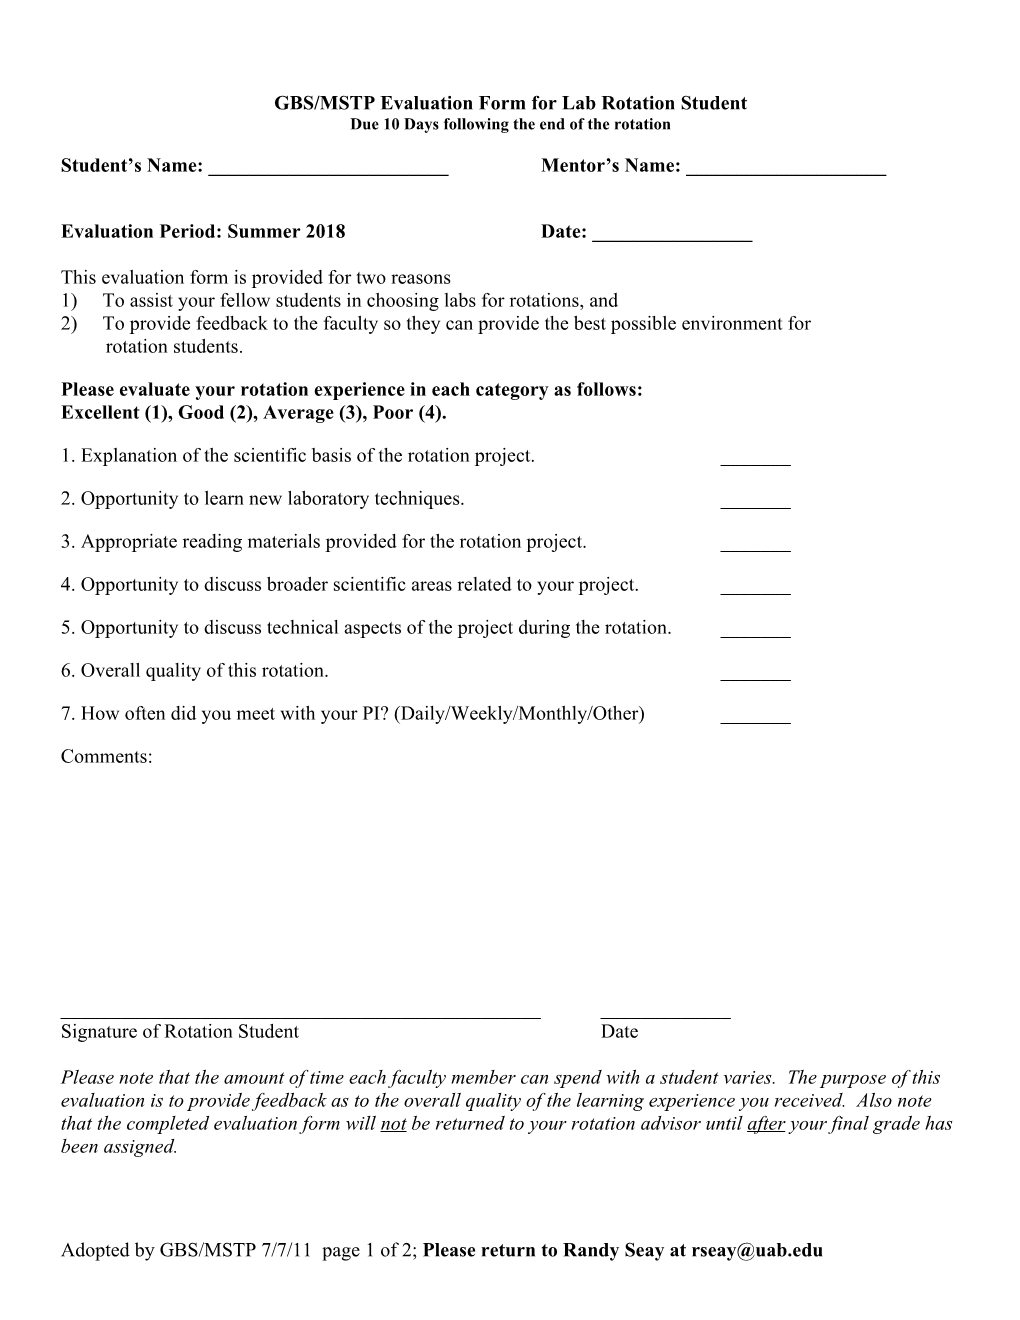 Evaluation Form for Lab Rotations